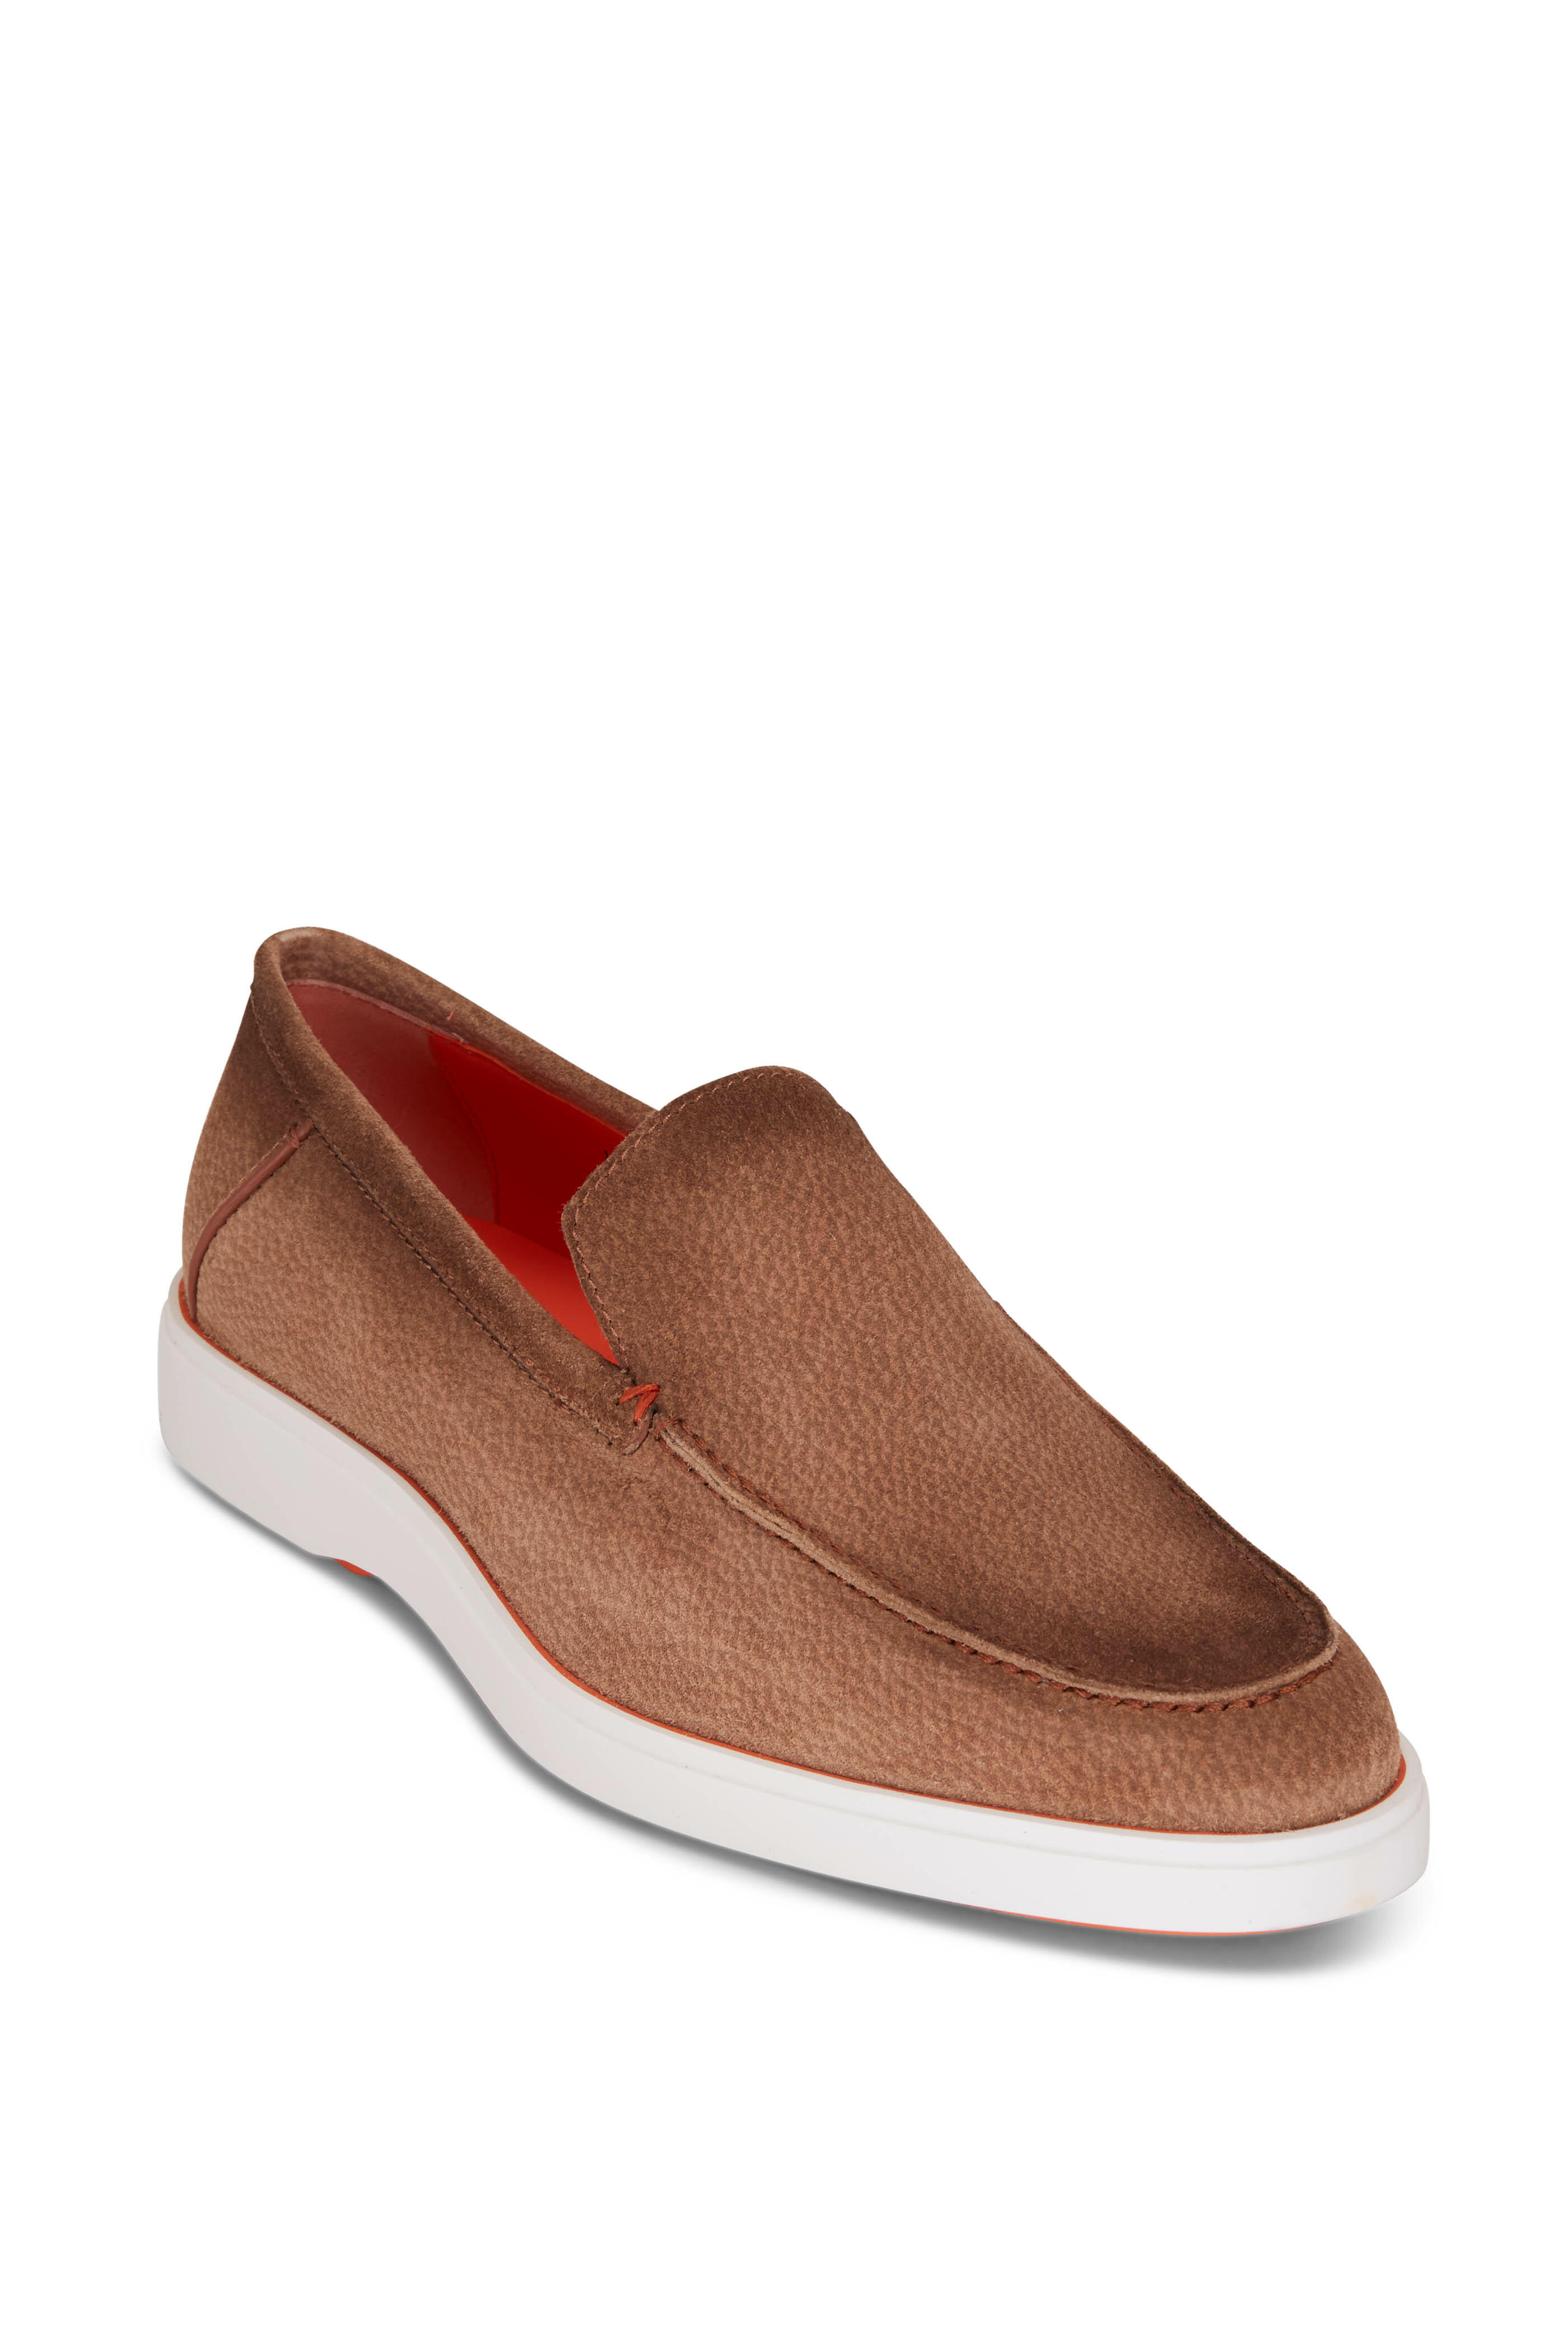 overzee fenomeen Ithaca Santoni - Drain Taupe Suede Loafer | Mitchell Stores